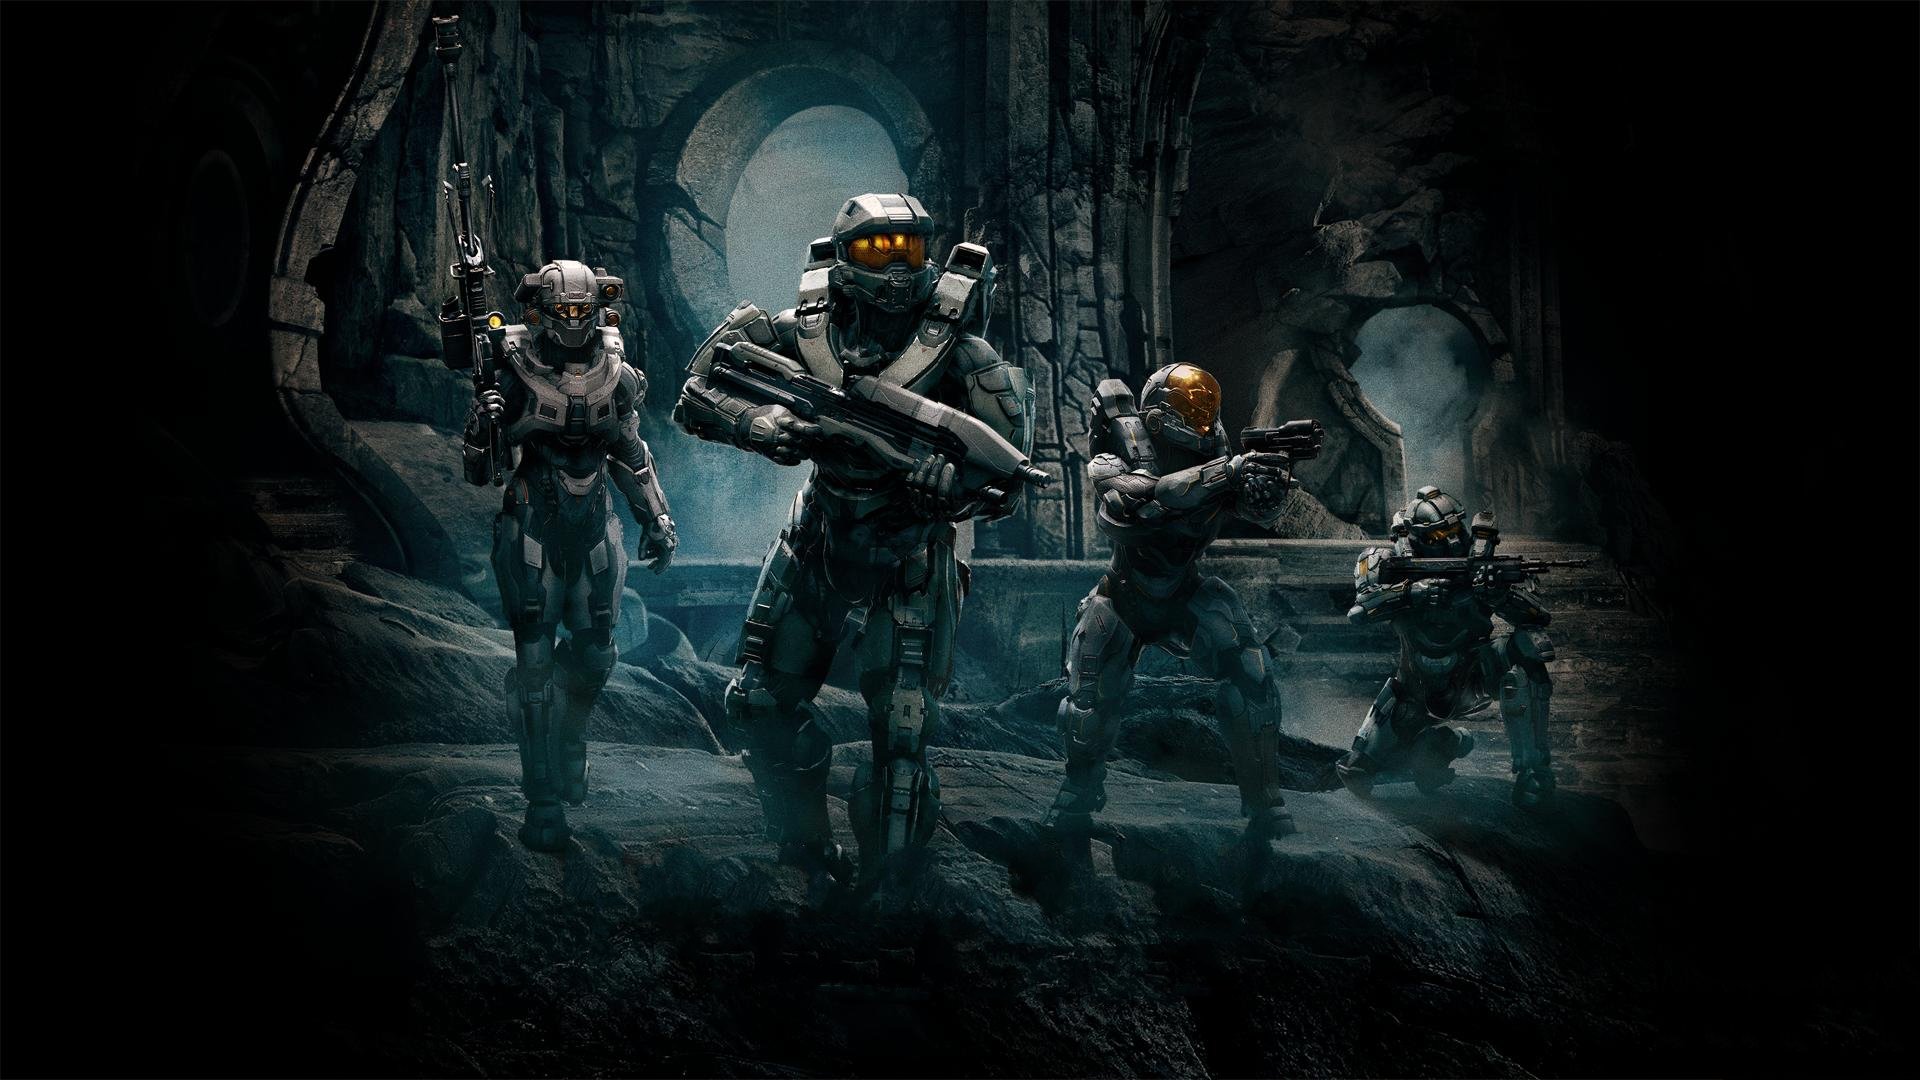 Awesome Halo 5: Guardians free wallpaper ID:117011 for hd 1920x1080 desktop